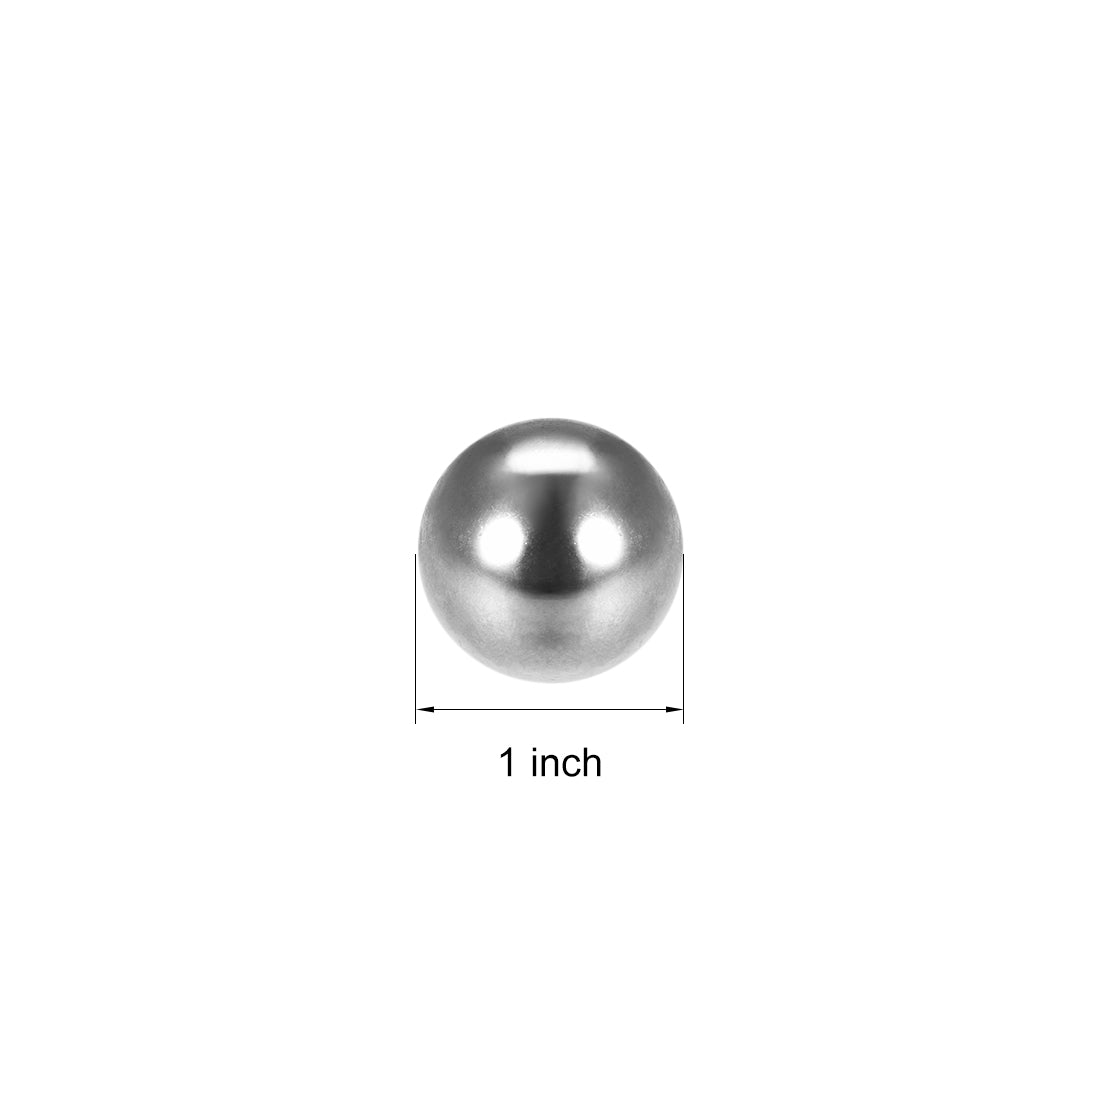 uxcell Uxcell Precision Balls 1-1/8" Solid Chrome Steel G25 for Ball Bearing Wheel